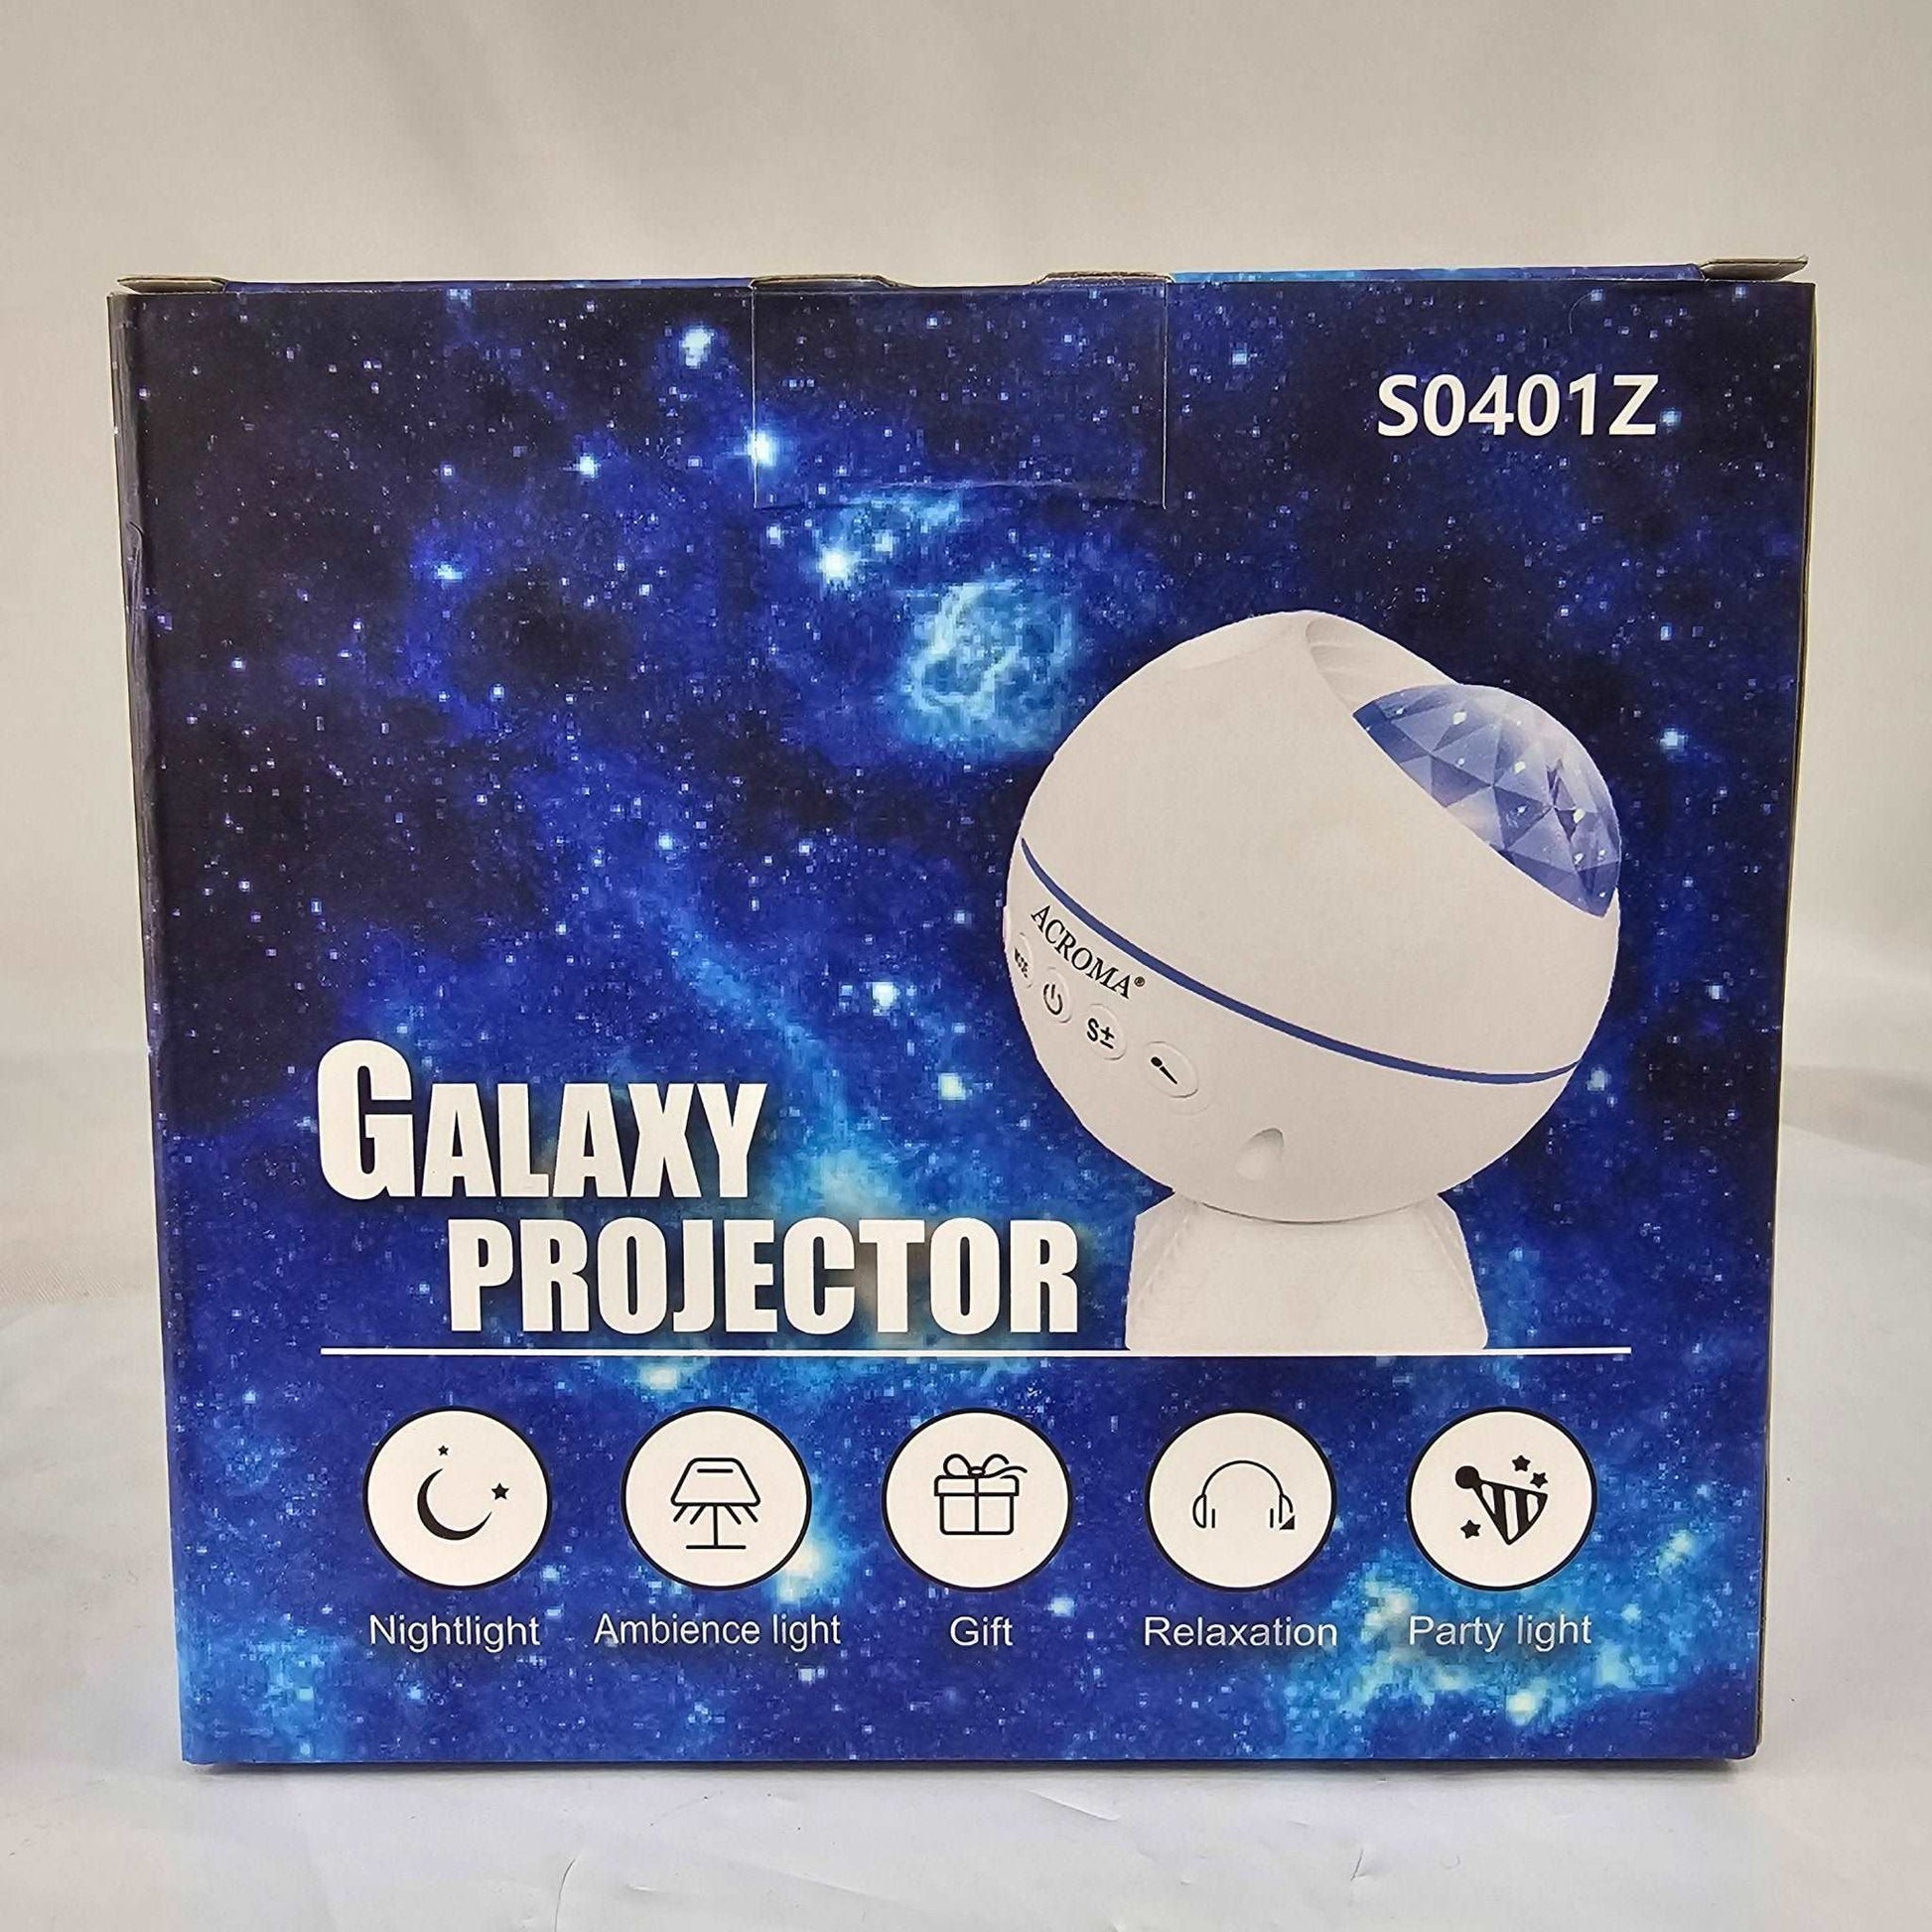 Galaxy Star Projector Nightlight - Green Star Ambience Light for Relaxation and Parties - DQ Distribution